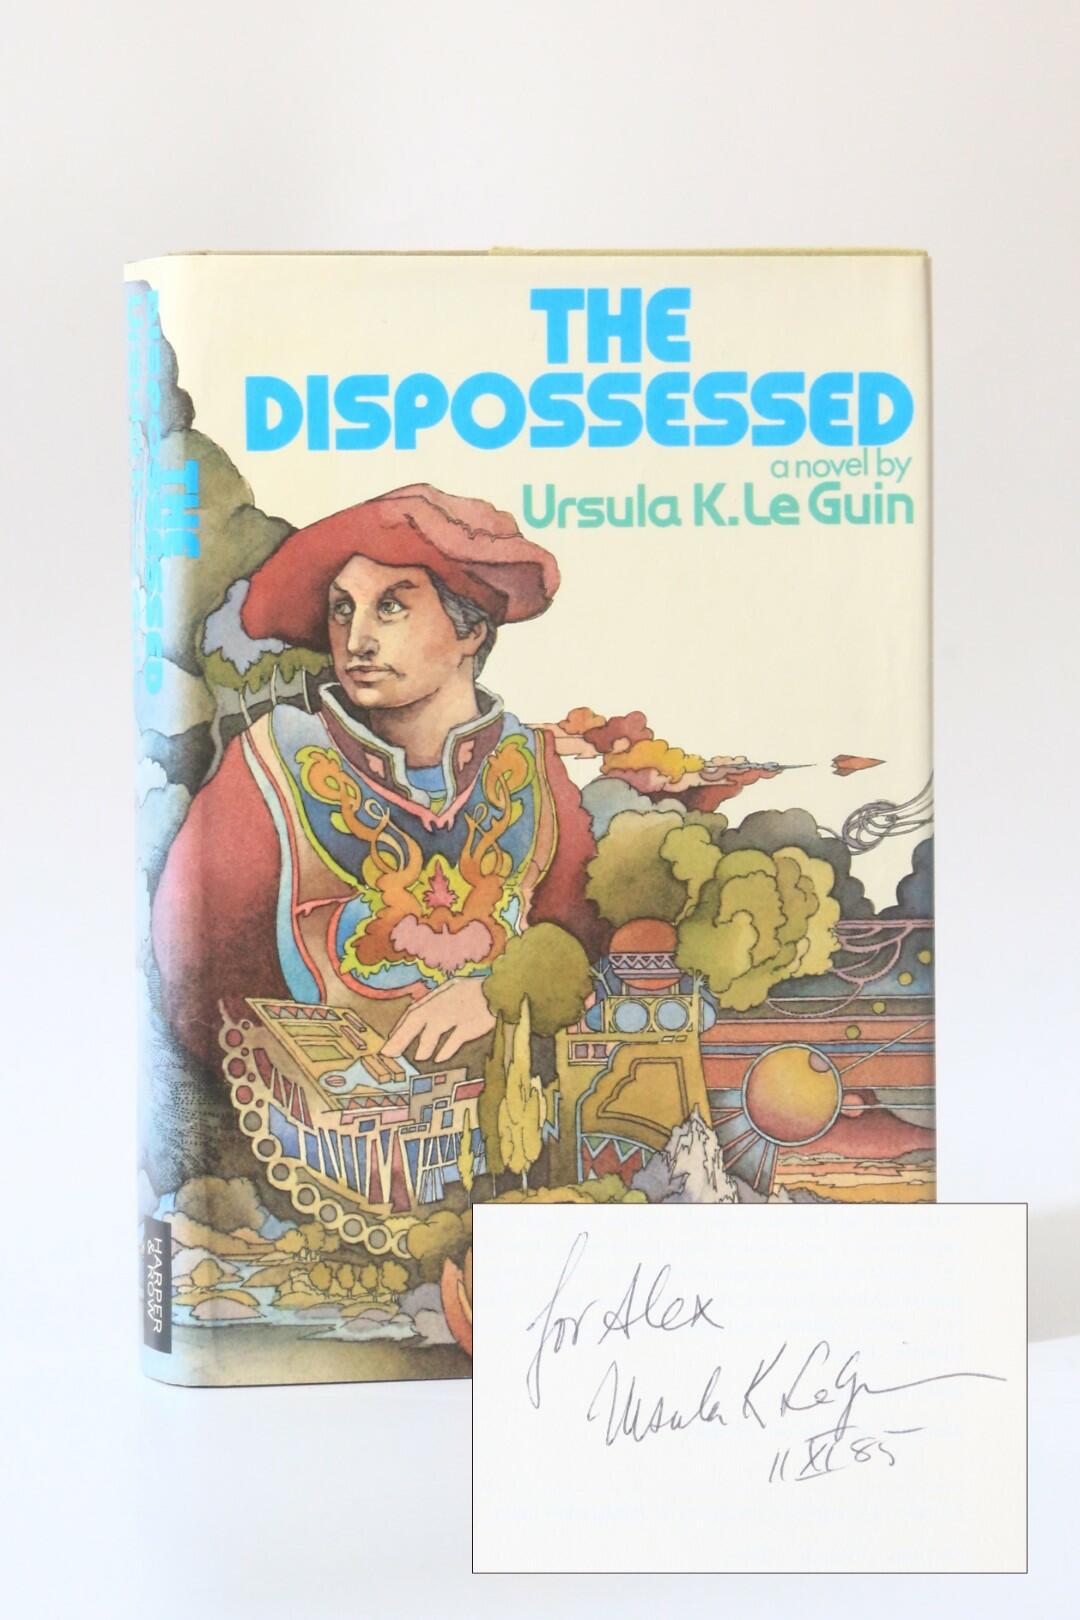 Ursula K. Le Guin - The Dispossessed: An Ambiguous Utopia - Harper & Row, 1974, Signed First Edition.